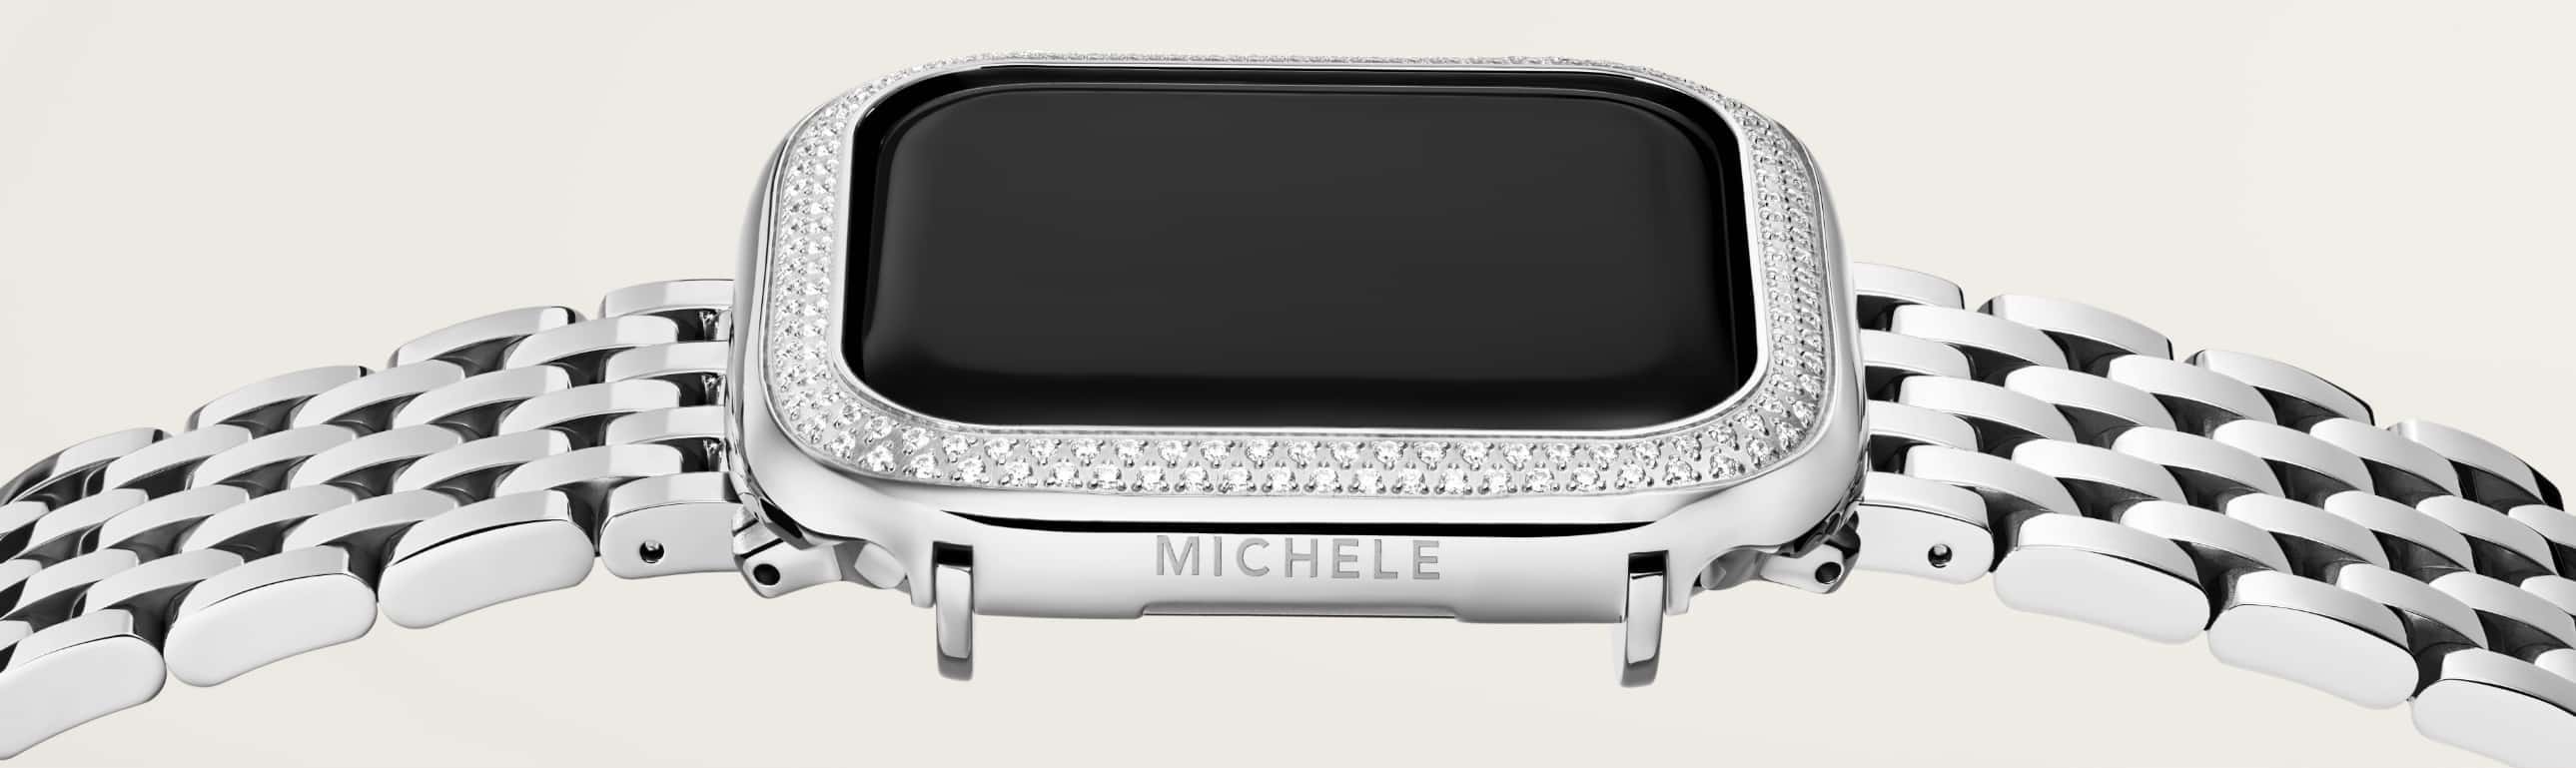 Image of a box of Michele branded watch straps